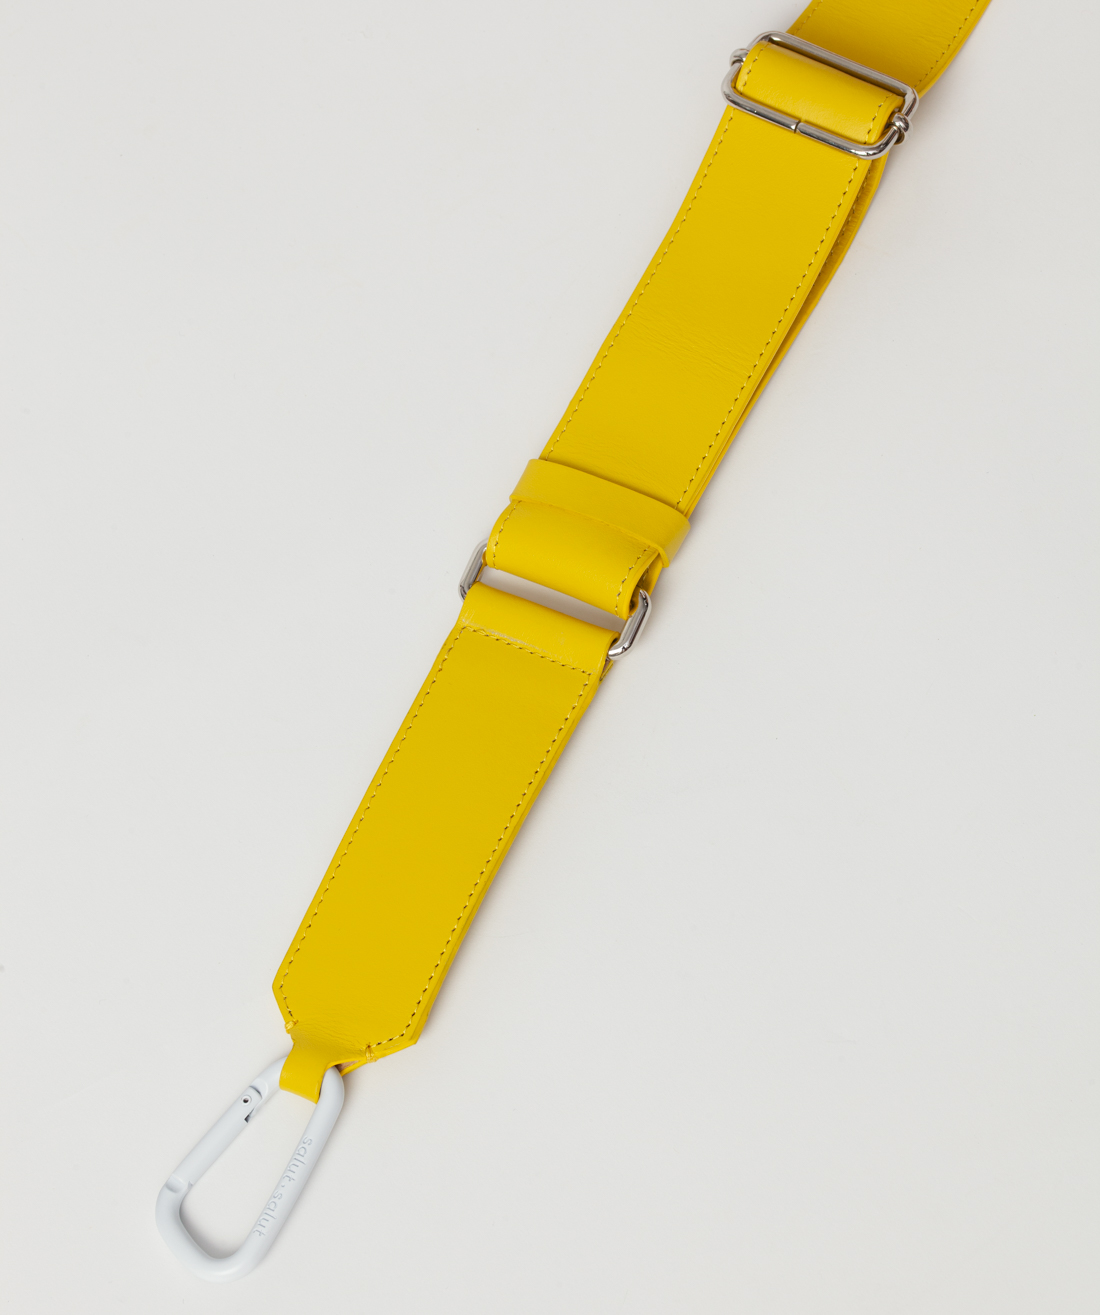 Wide leather strap - YELLOW LEATHER